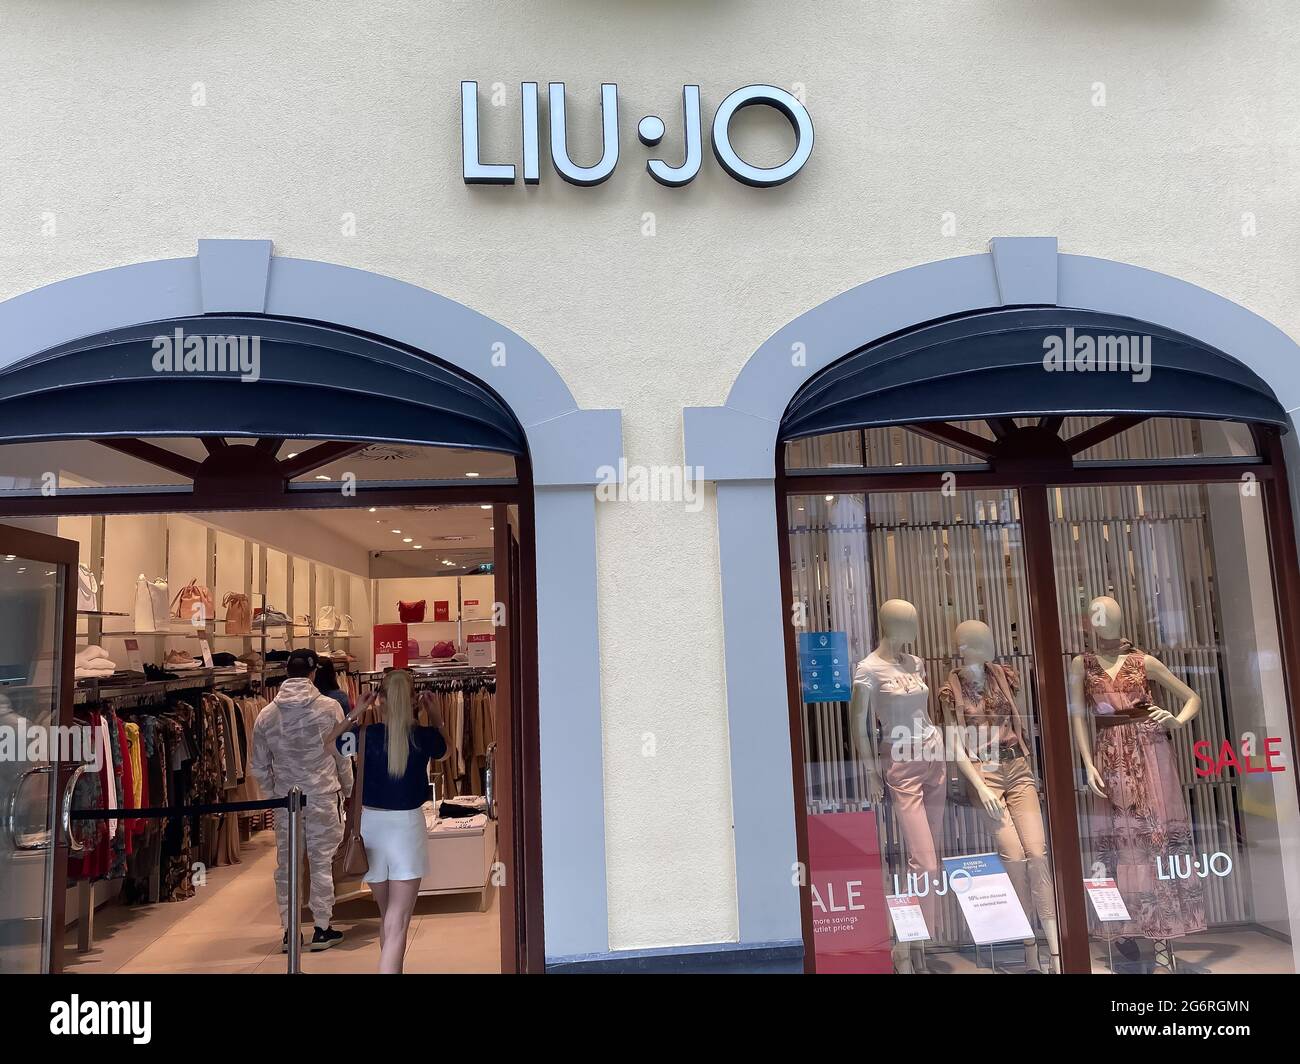 Roermond, Netherlands - July 1. 2021: View on store facade with logo  lettering of liu jo fashion label Stock Photo - Alamy